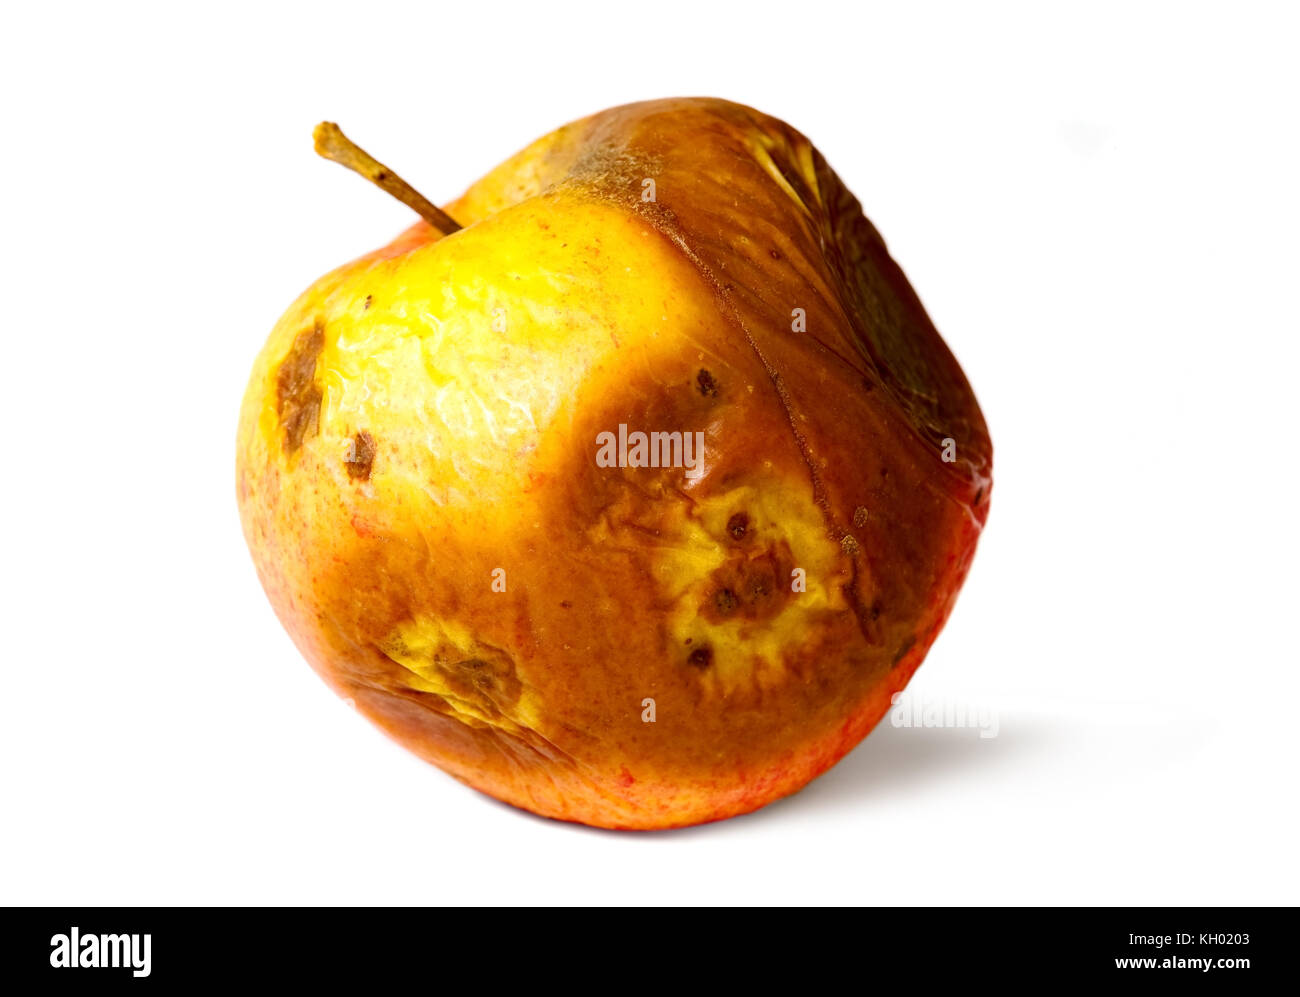 Old rotten apple on white isolated background, unhealthy to eat Stock Photo